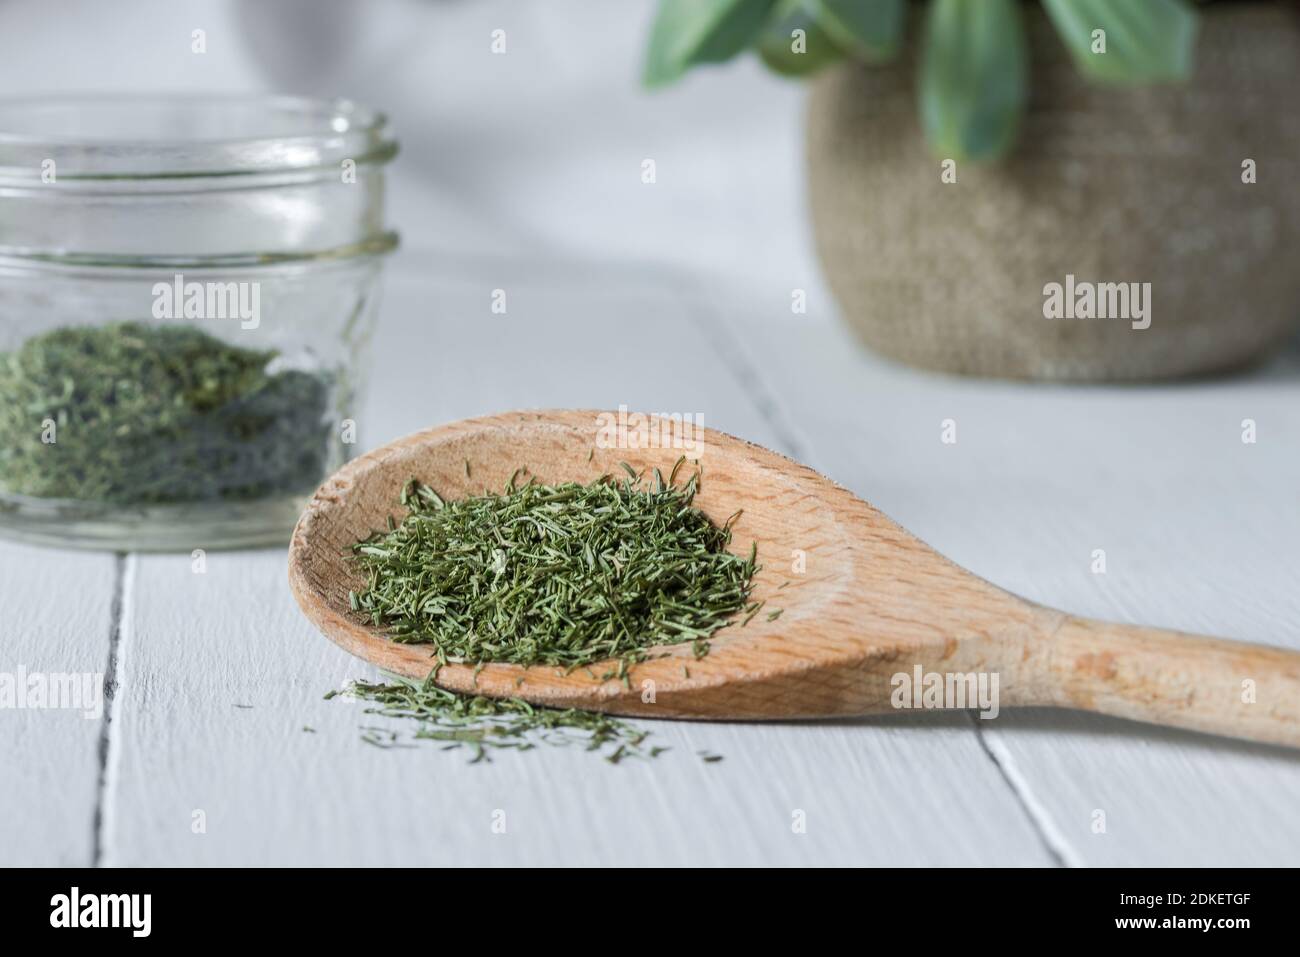 Close-up Of Fresh Herb On Table Stock Photo